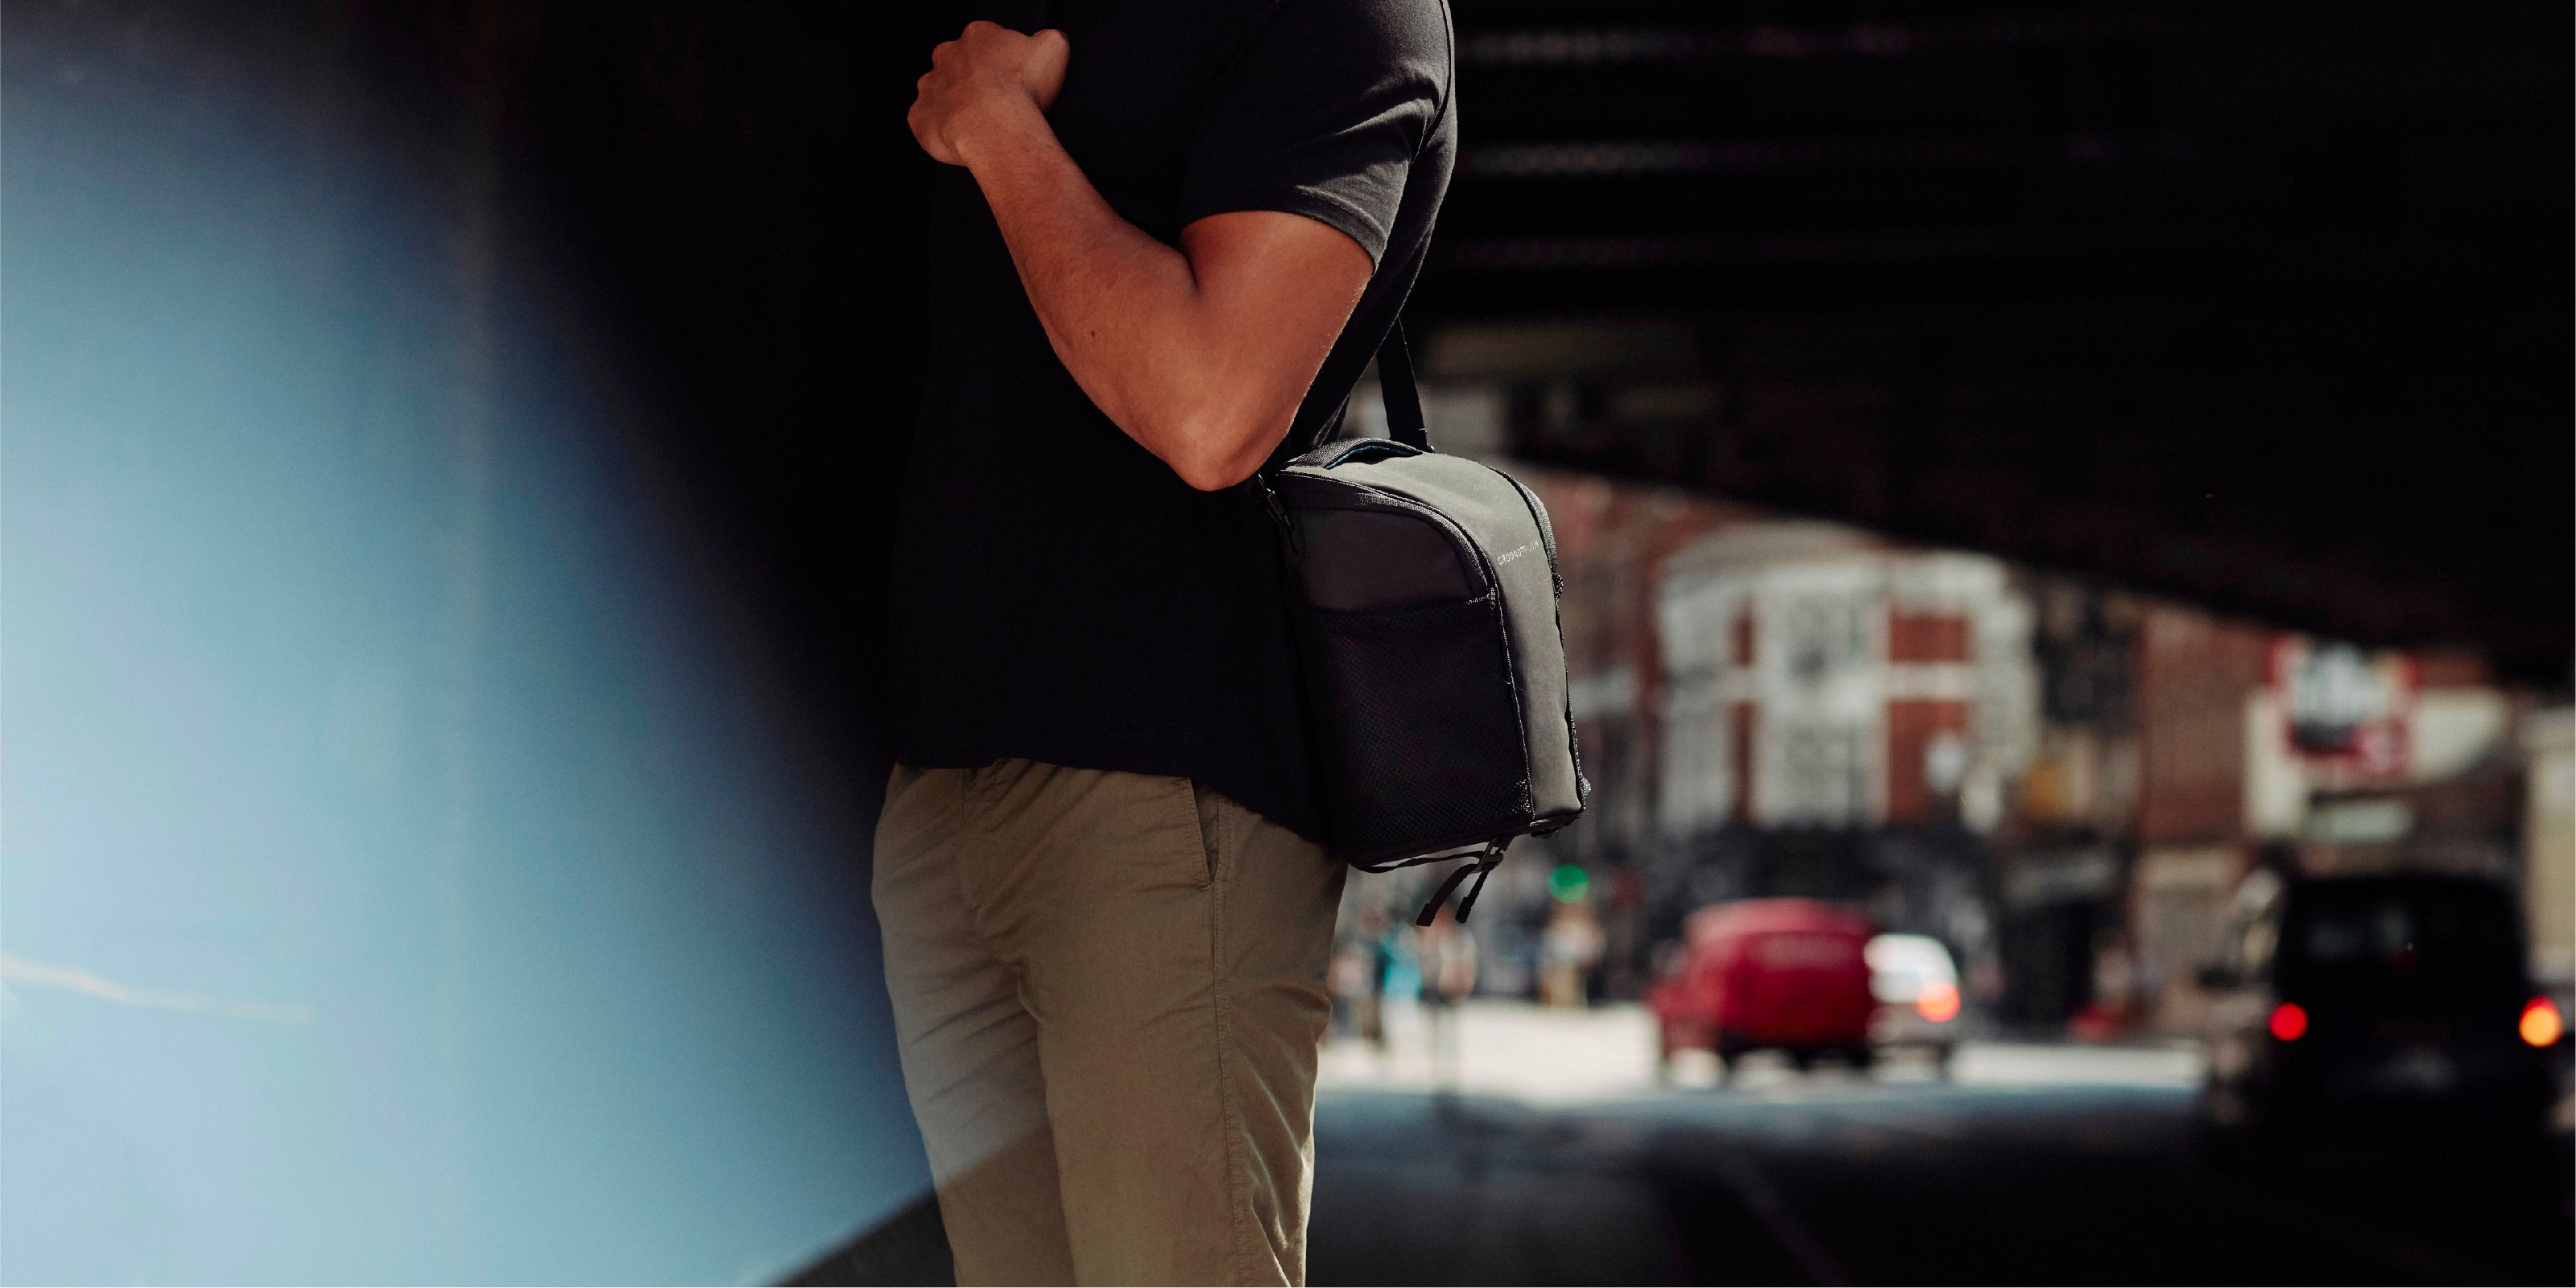 The RIKR camera bag as part of Groundtruth accessory collection